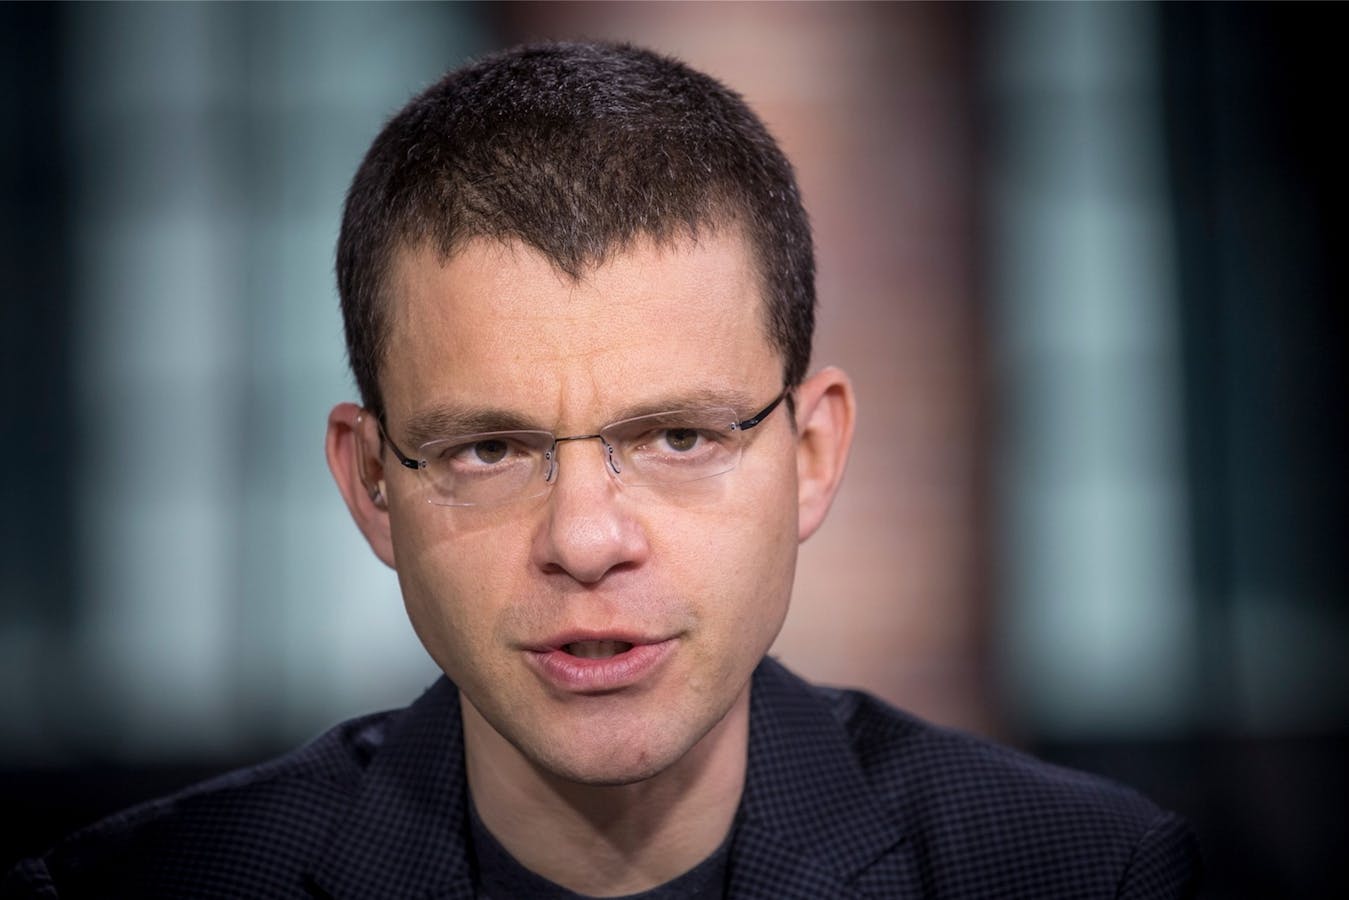 Affirm CEO Max Levchin. Photo: Bloomberg